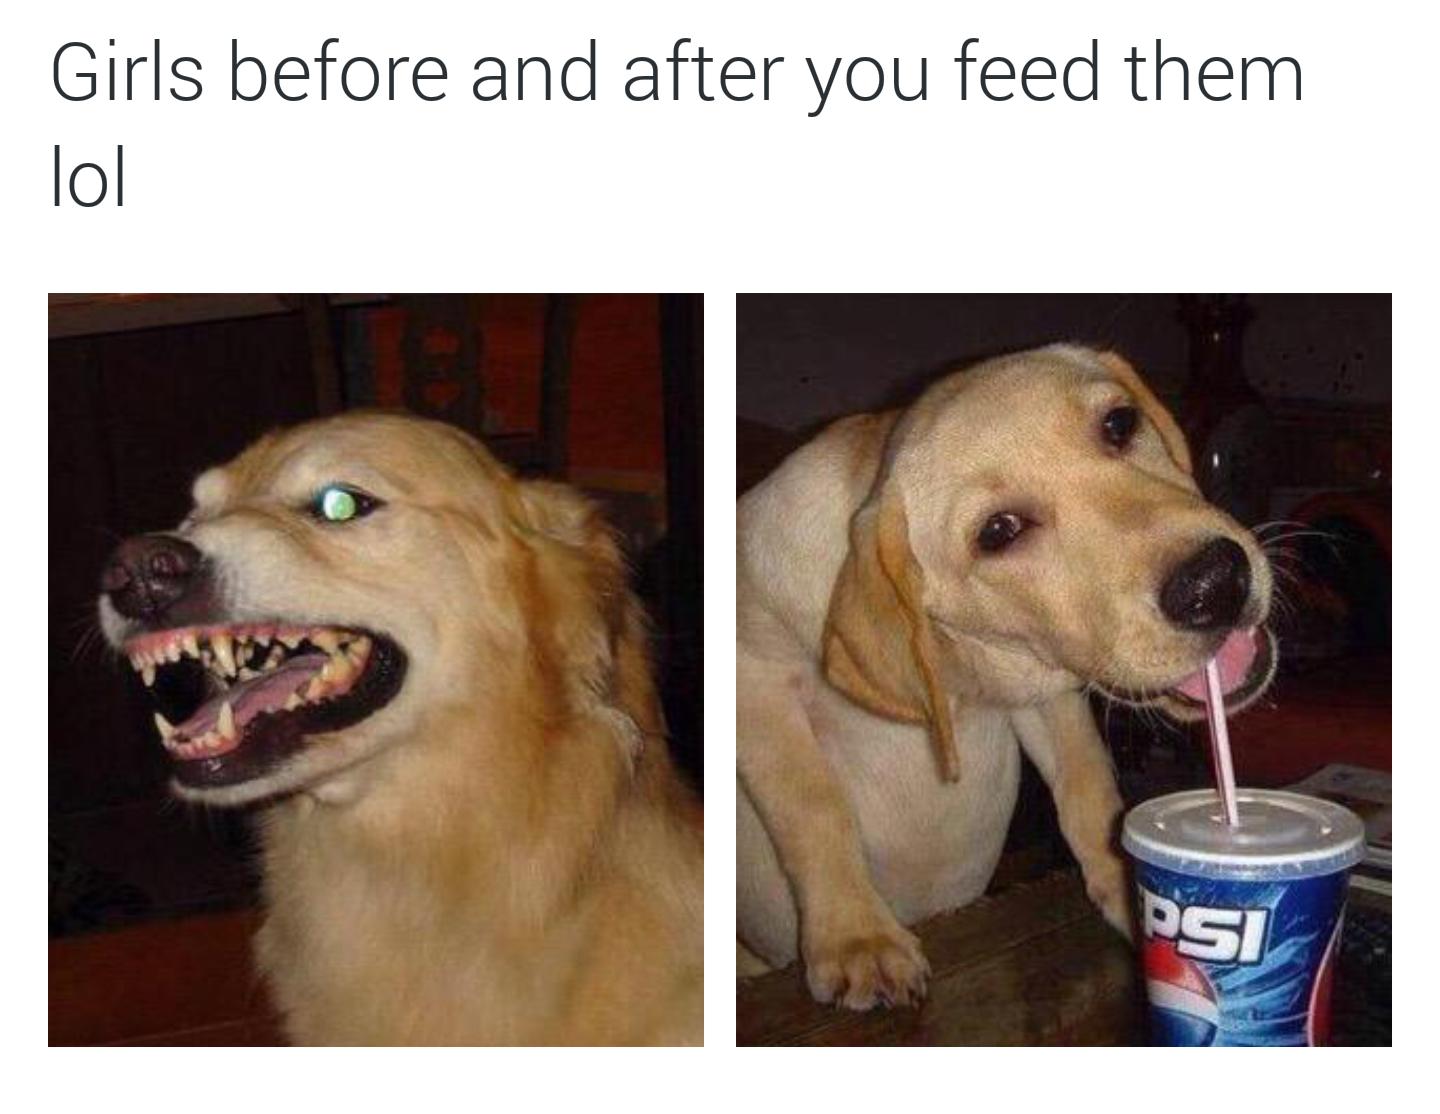 Girls before and after you feed them